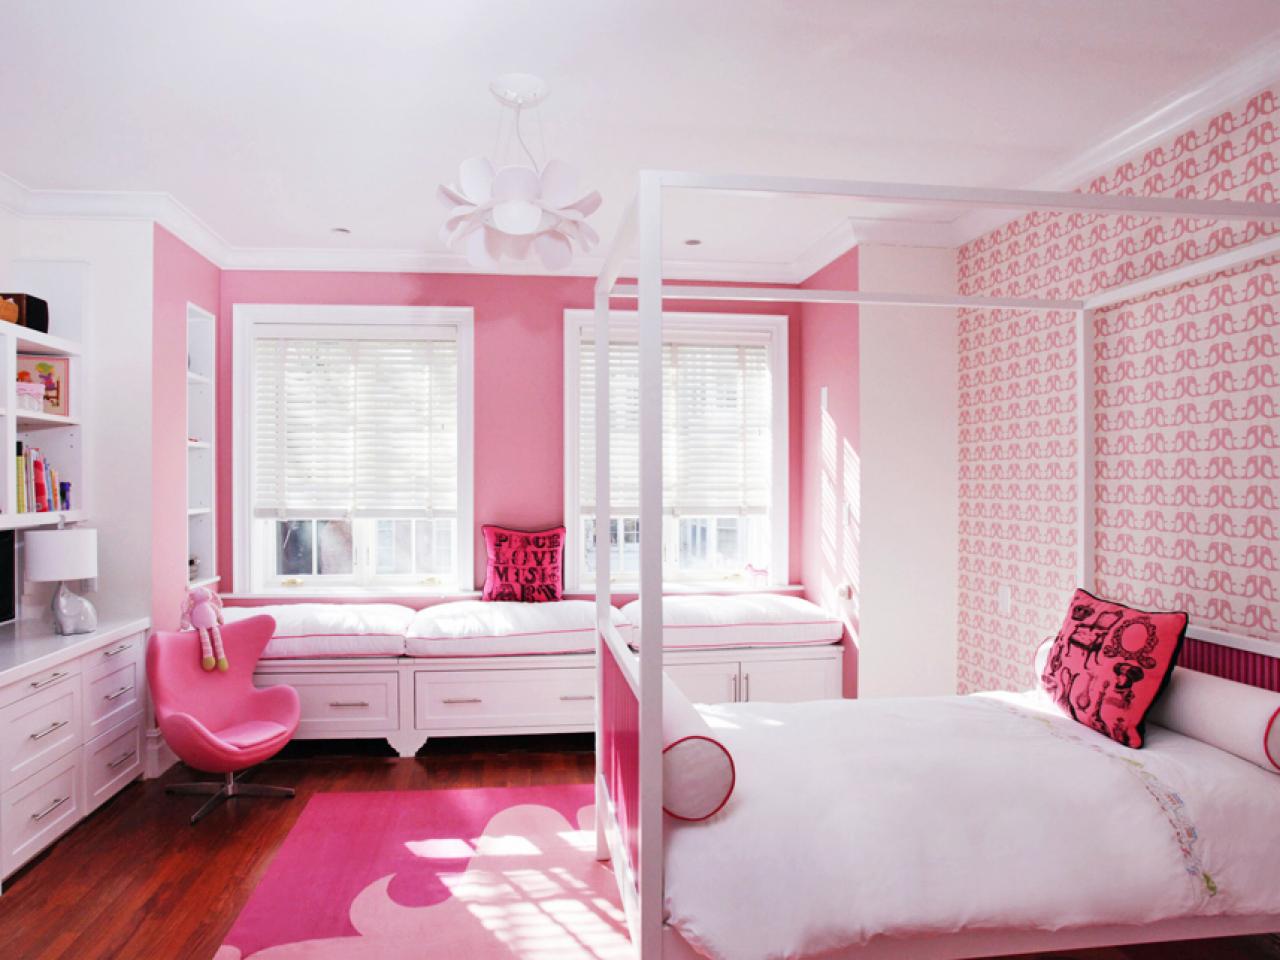 Ideas For A Pink Bedroom Home Decor